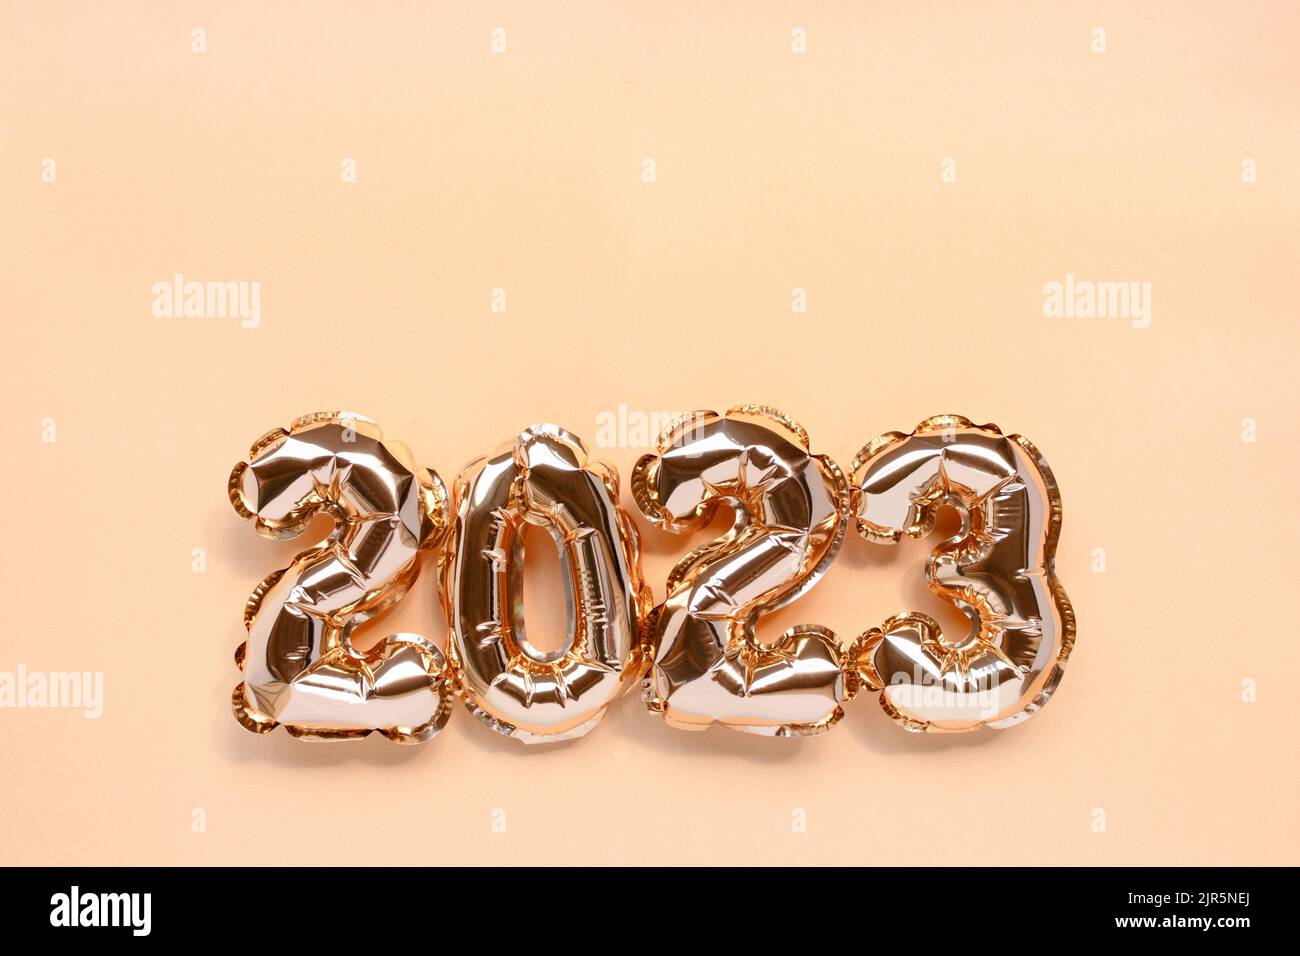 2023 golden balloons on a shiny background with copy space. Monochrome New Year's composition. Stock Photo